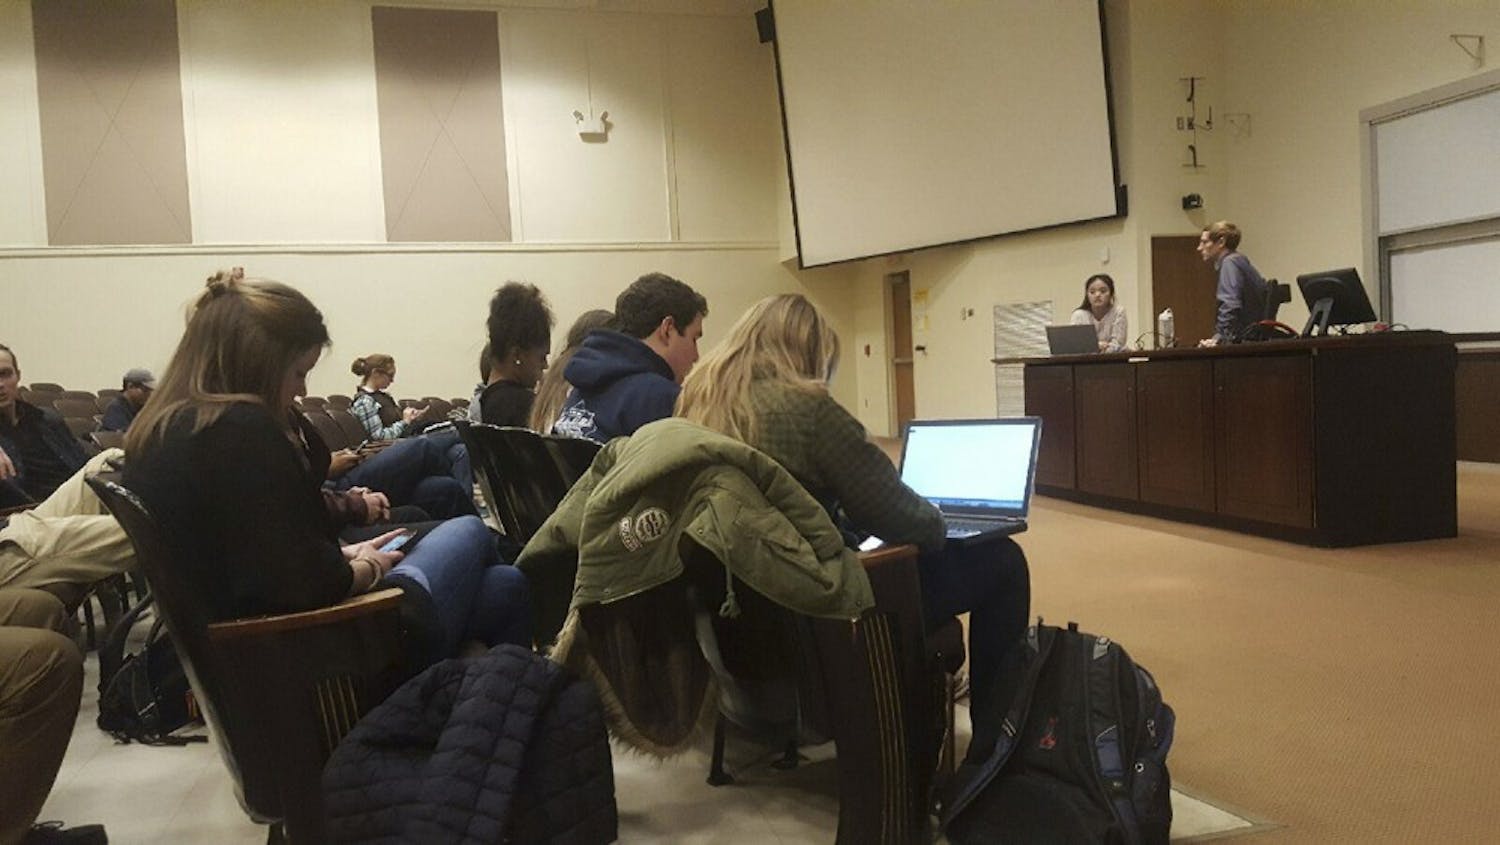 A meeting was held in Carroll Hall on Monday for students to announce their intent to run for Student Body President.